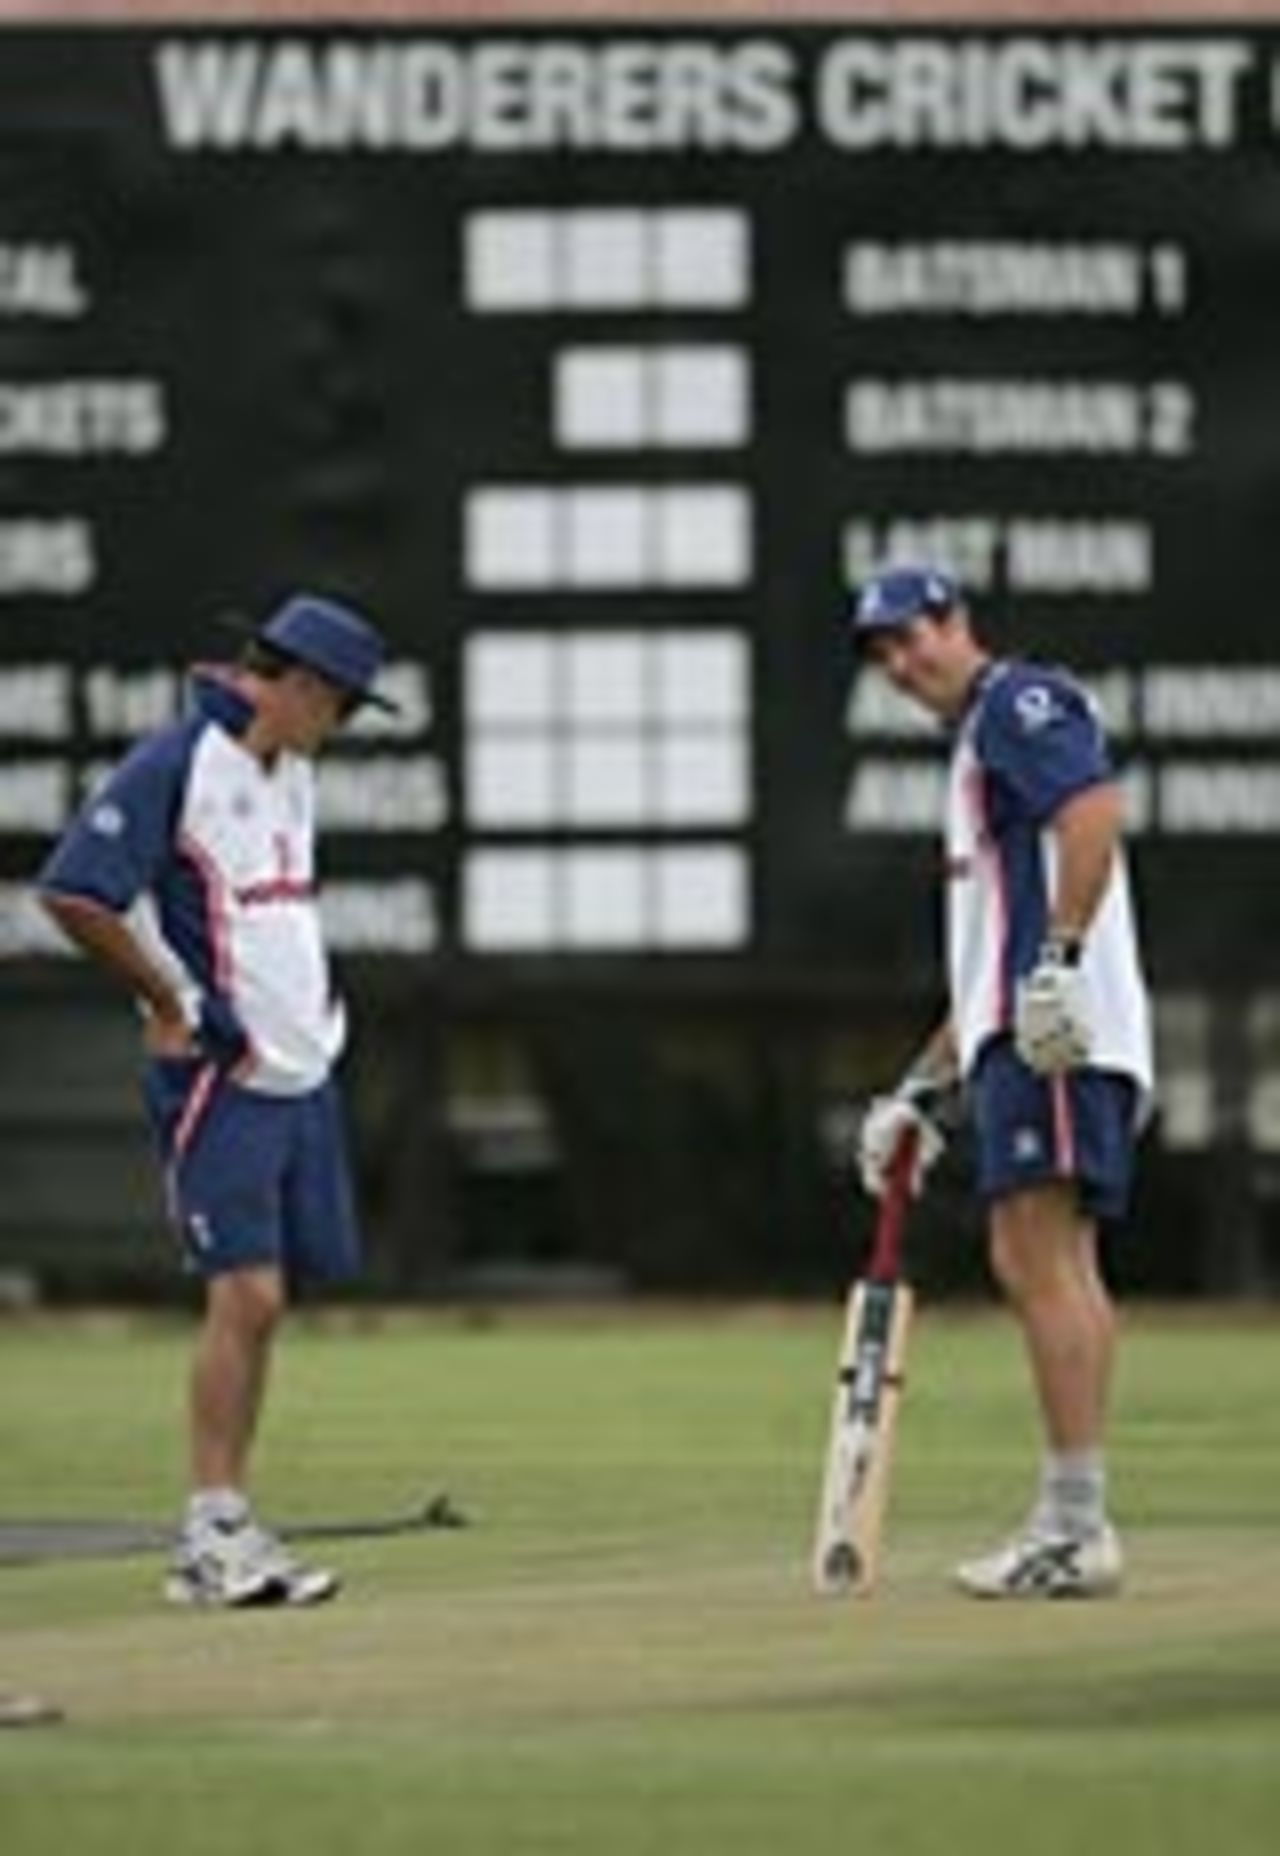 Michael Vaughan inspects the wicket, Windhoek, Namibia, November 18 2004